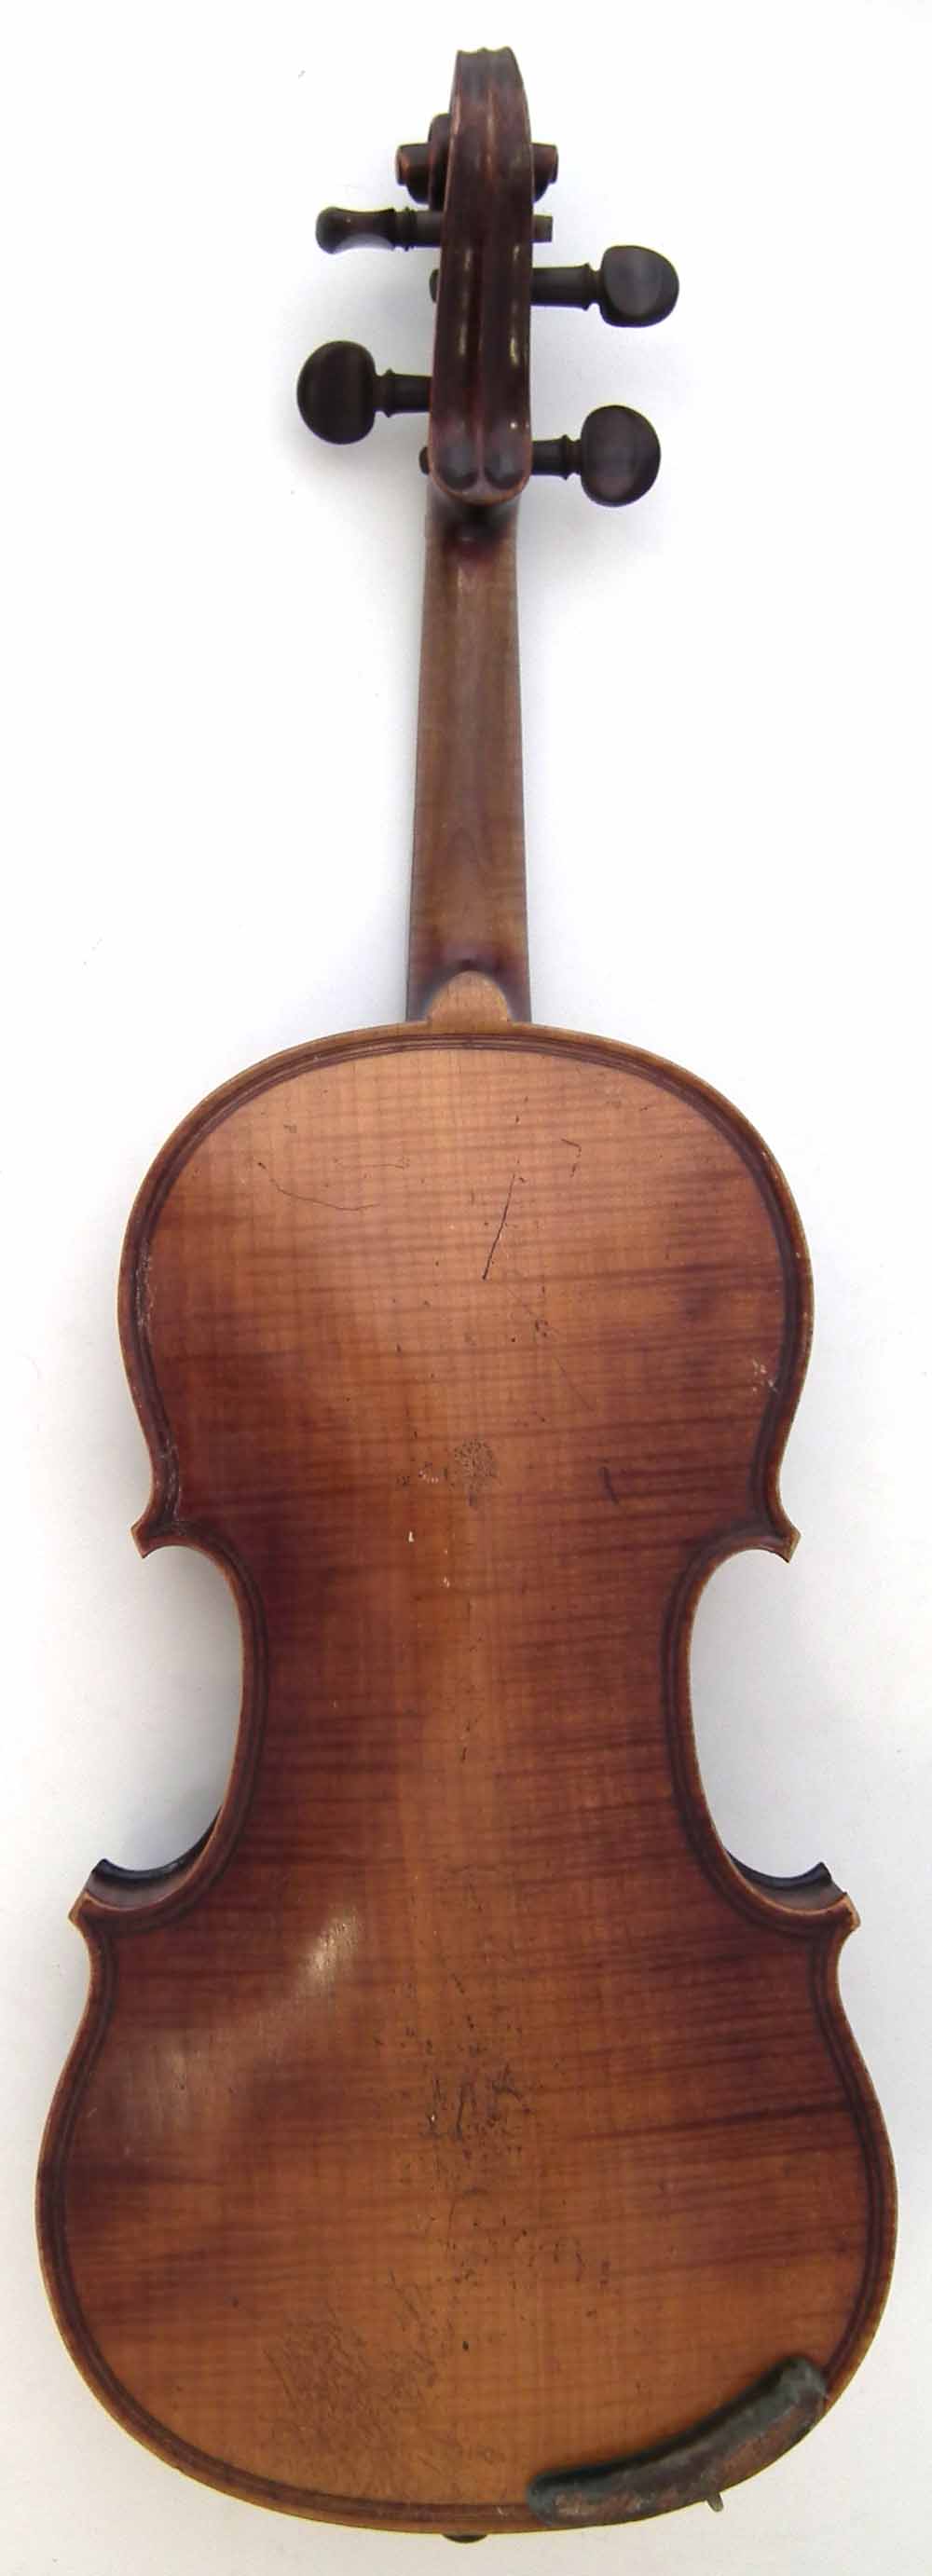 Violin in the style of Gaspar da Salo, with one piece tightly flamed back, double line purfling, - Image 10 of 17